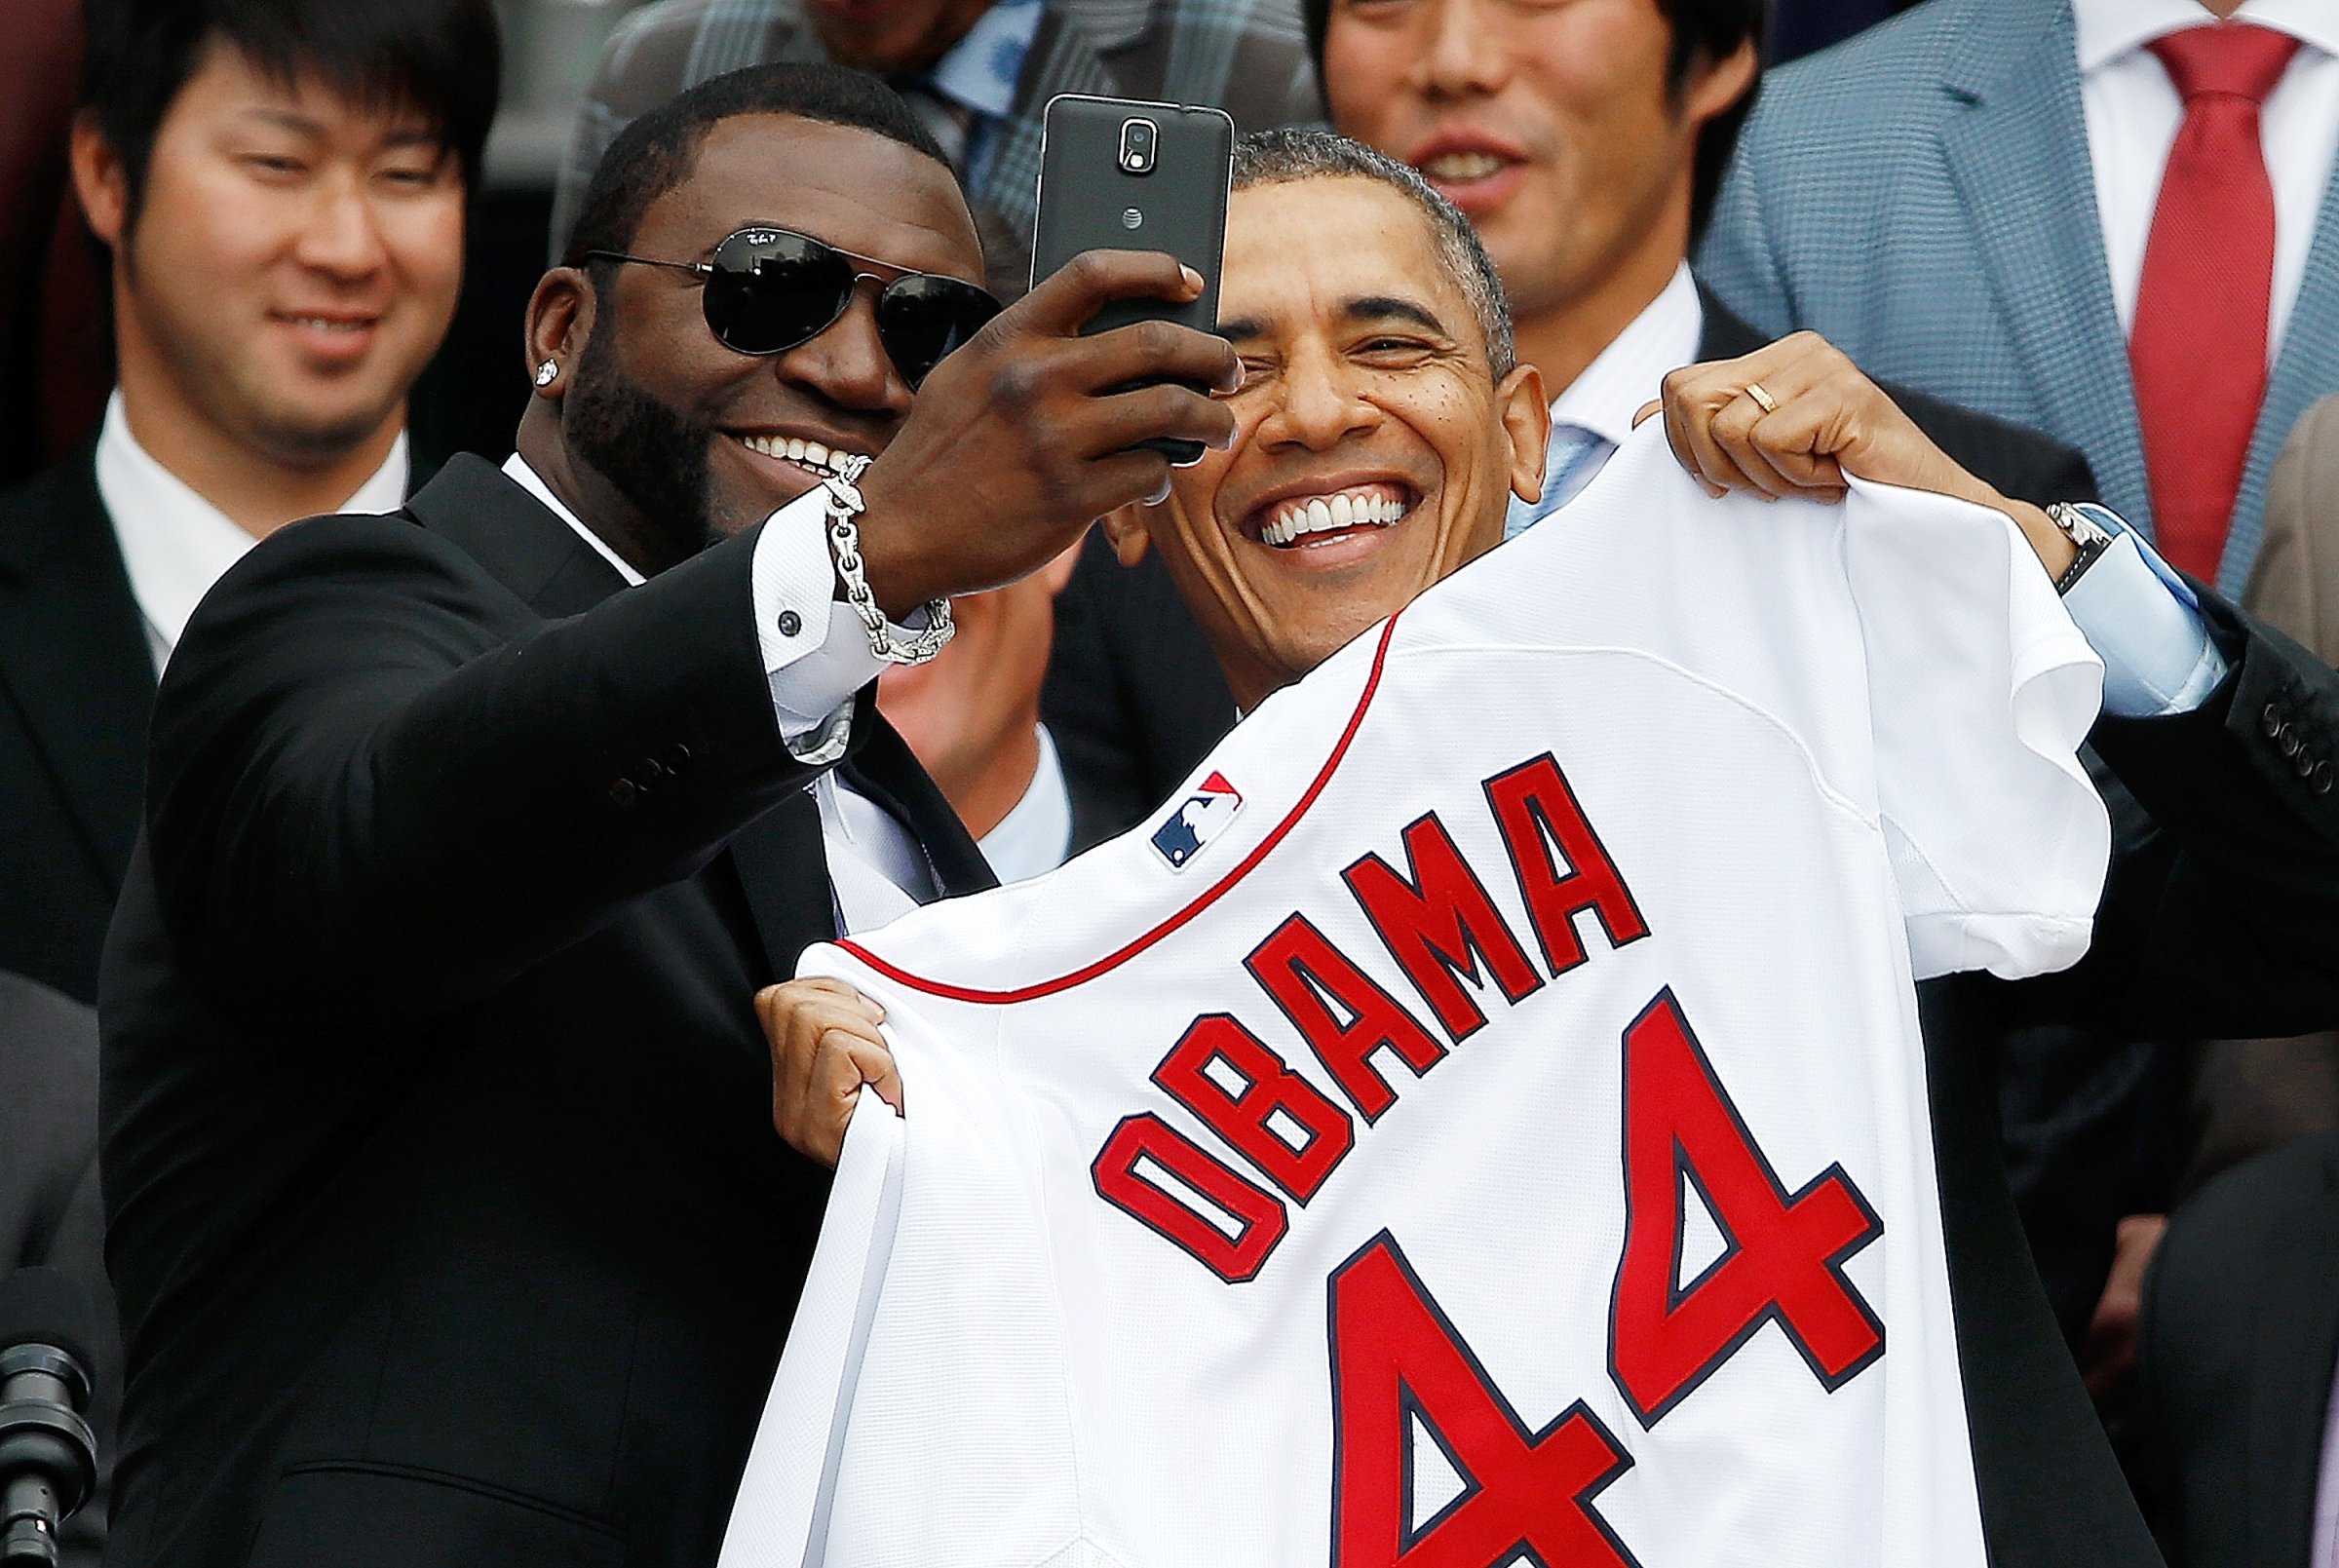 WASHINGTON, DC - APRIL 01: Boston Red Sox designated hitter David Ortiz (L) poses for a "selfie" with U.S. President Barack Obama during a ceremony on the South Lawn of the White House to honor the 2013 World Series Champion Boston Red Sox April 1, 2014 in Washington, DC. The Red Sox defeated the St. Louis Cardinals in the 2013 World Series.(Photo by Win McNamee/Getty Images)